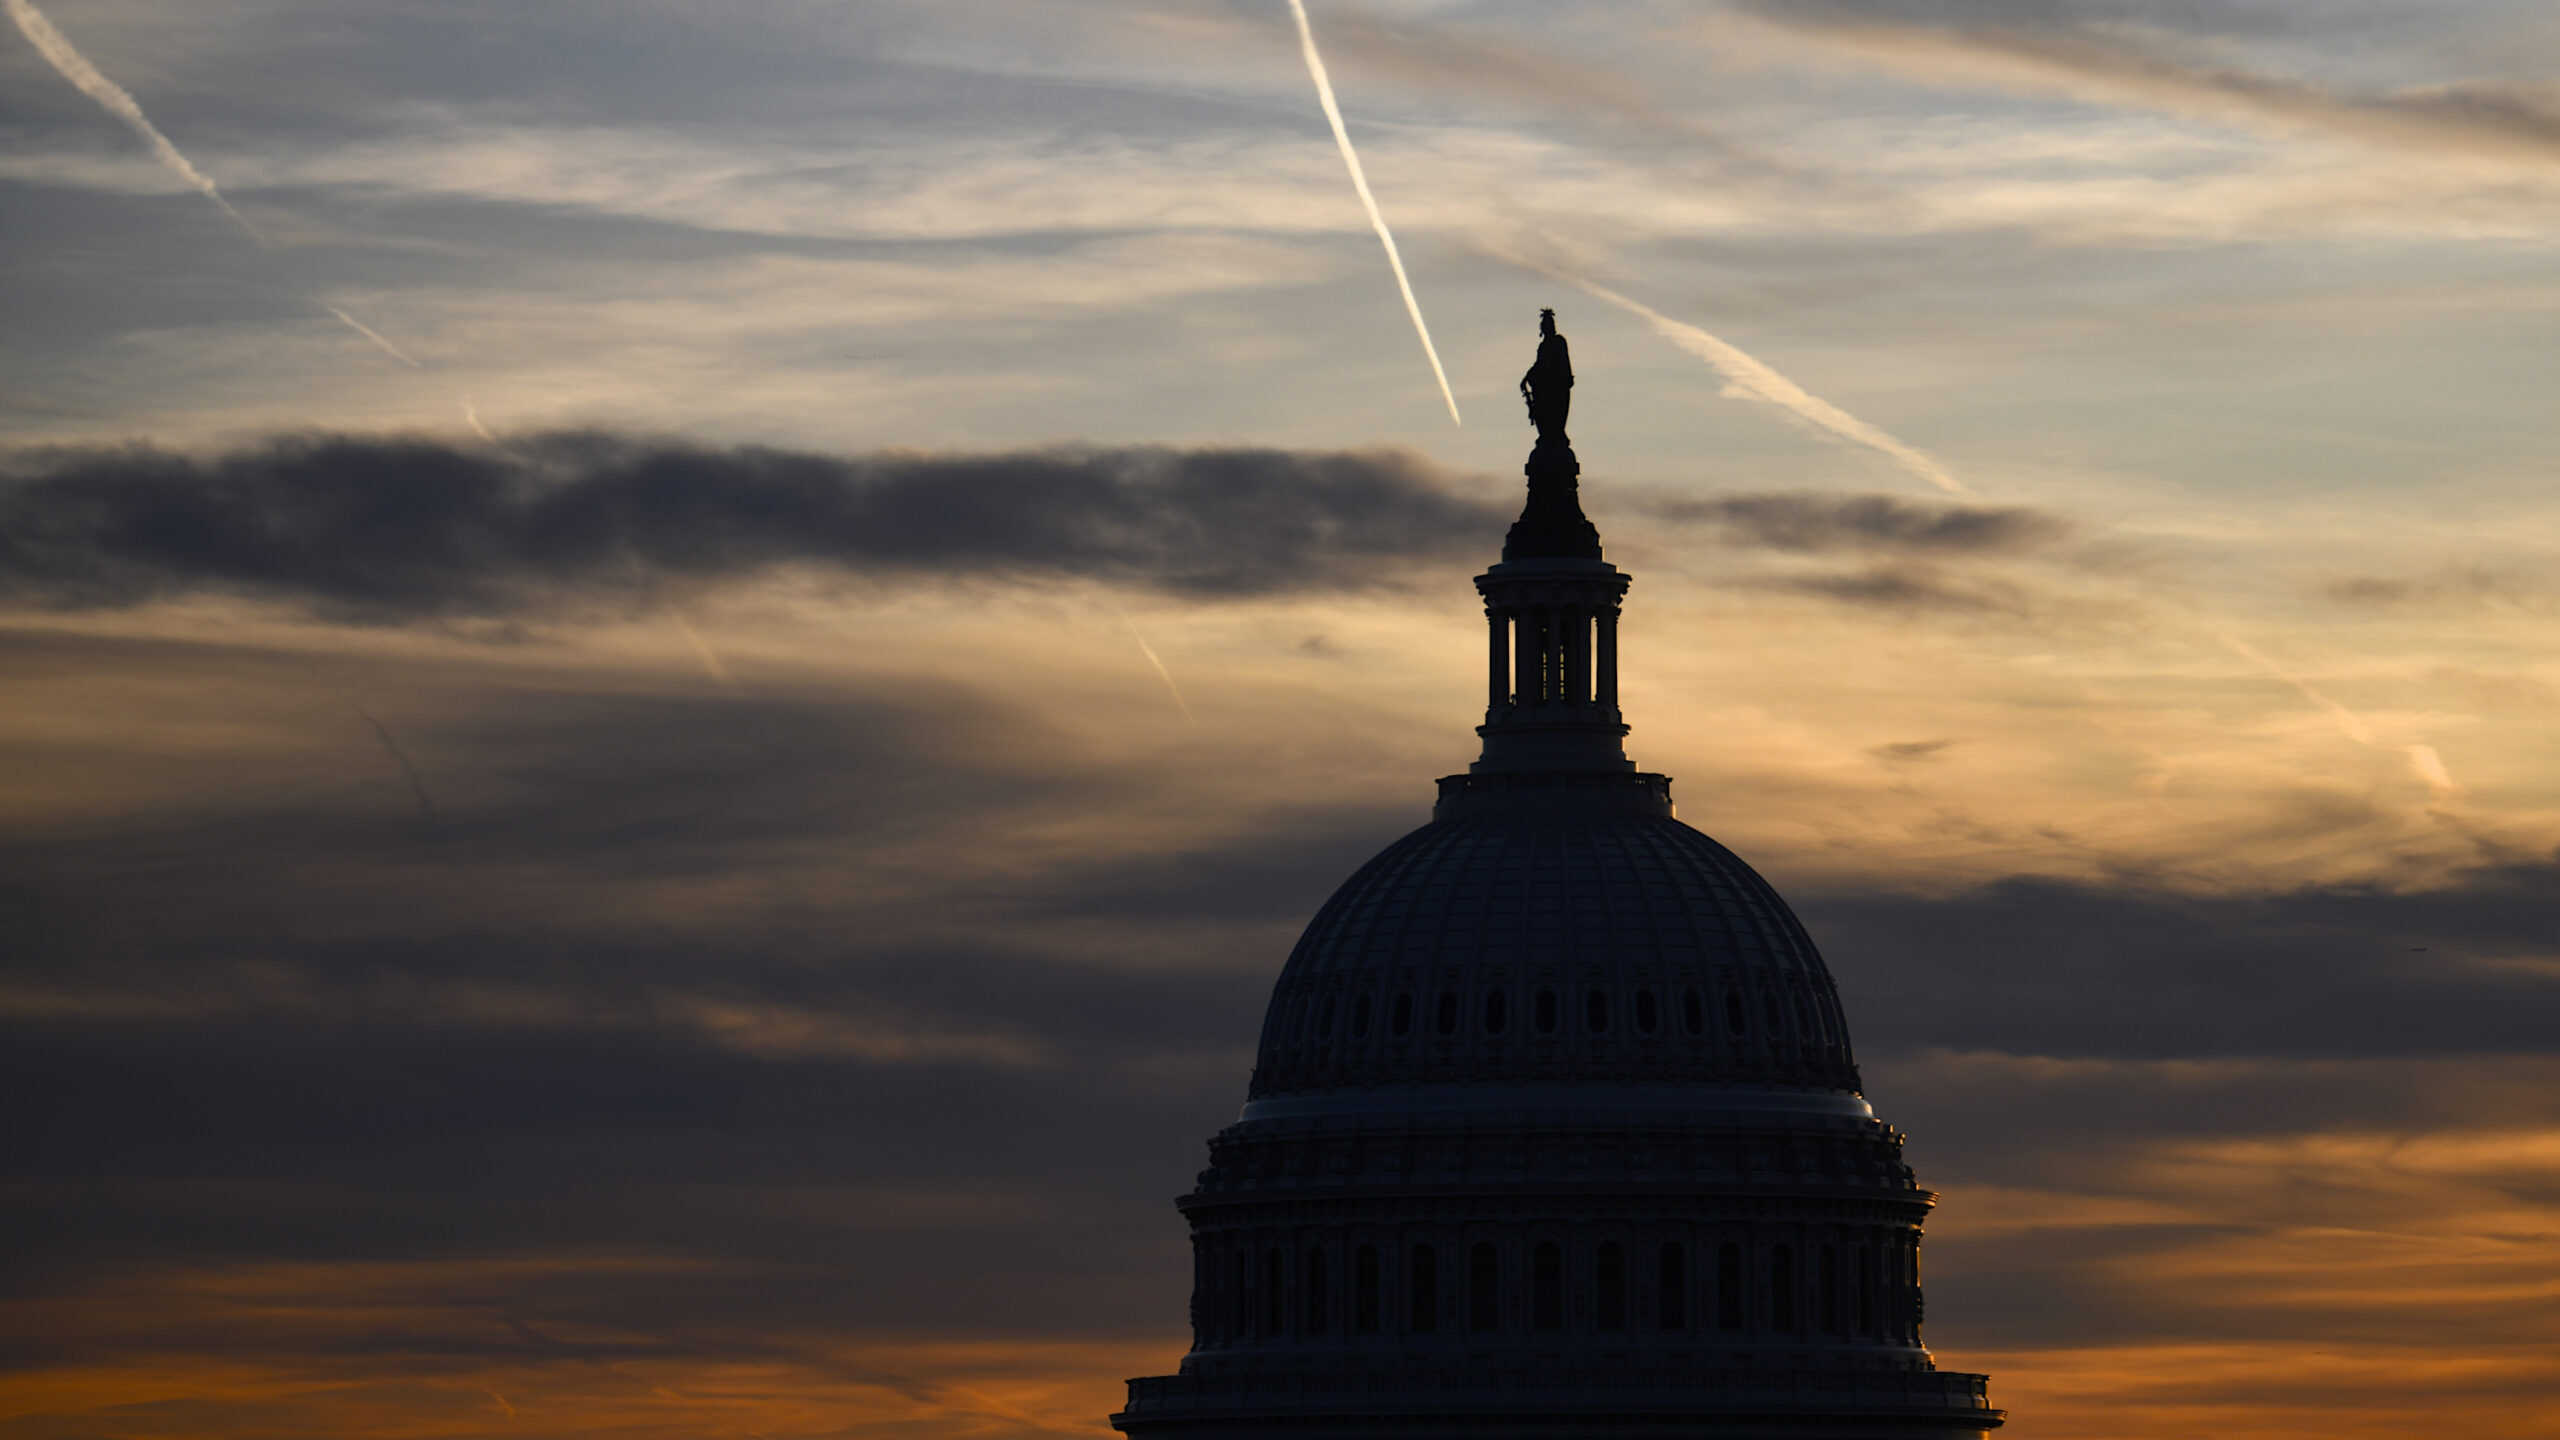 In fiscal 2025, bet on Congress or begin to pivot